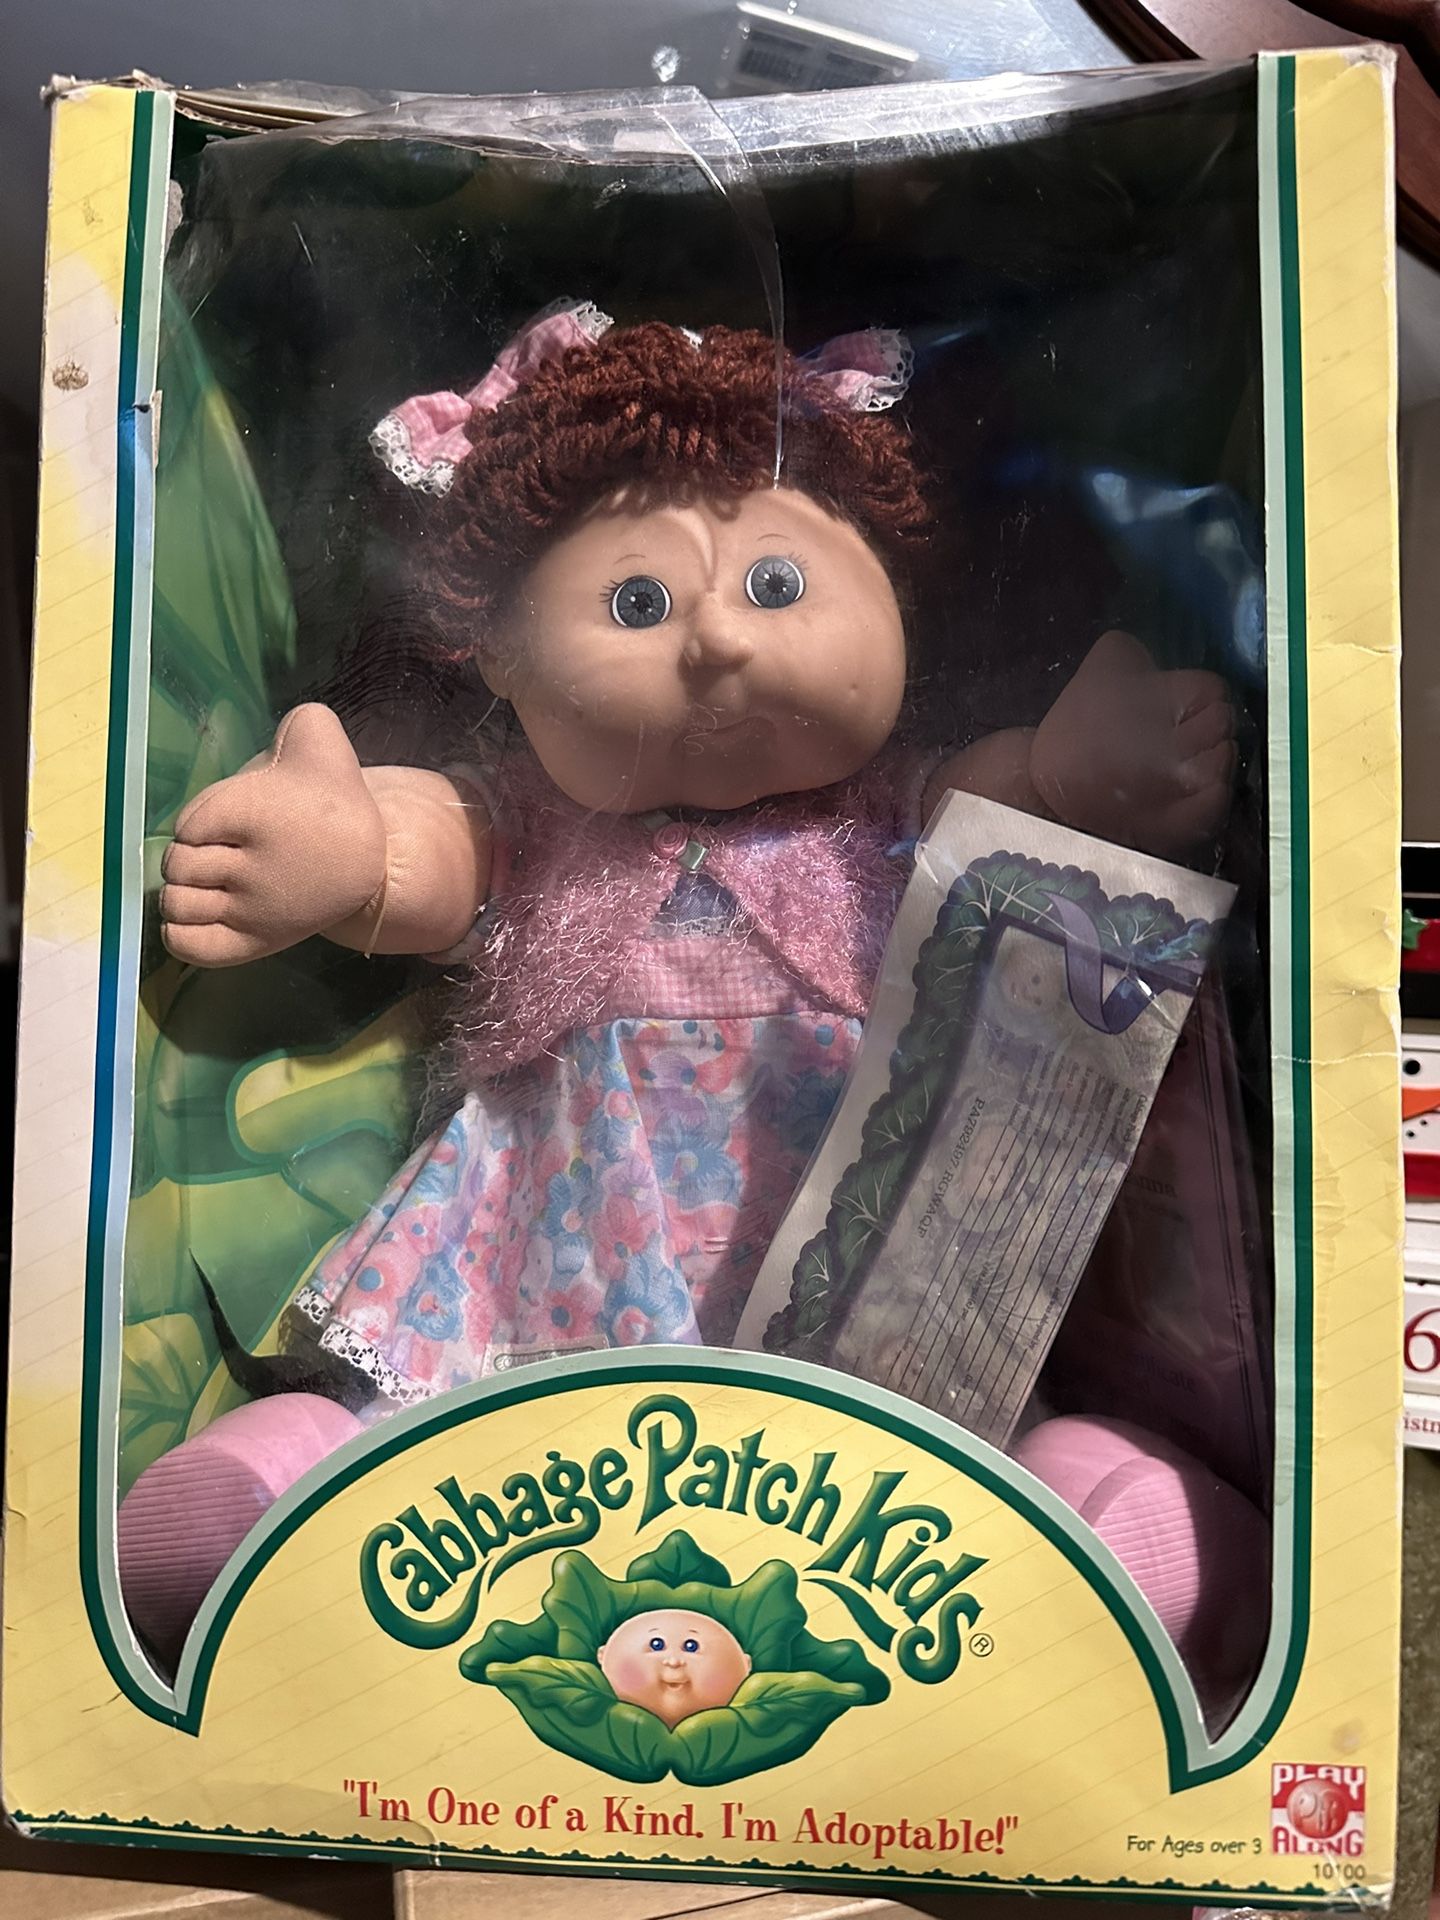 Original Cabbage Patch Kid  Doll of collection $120 